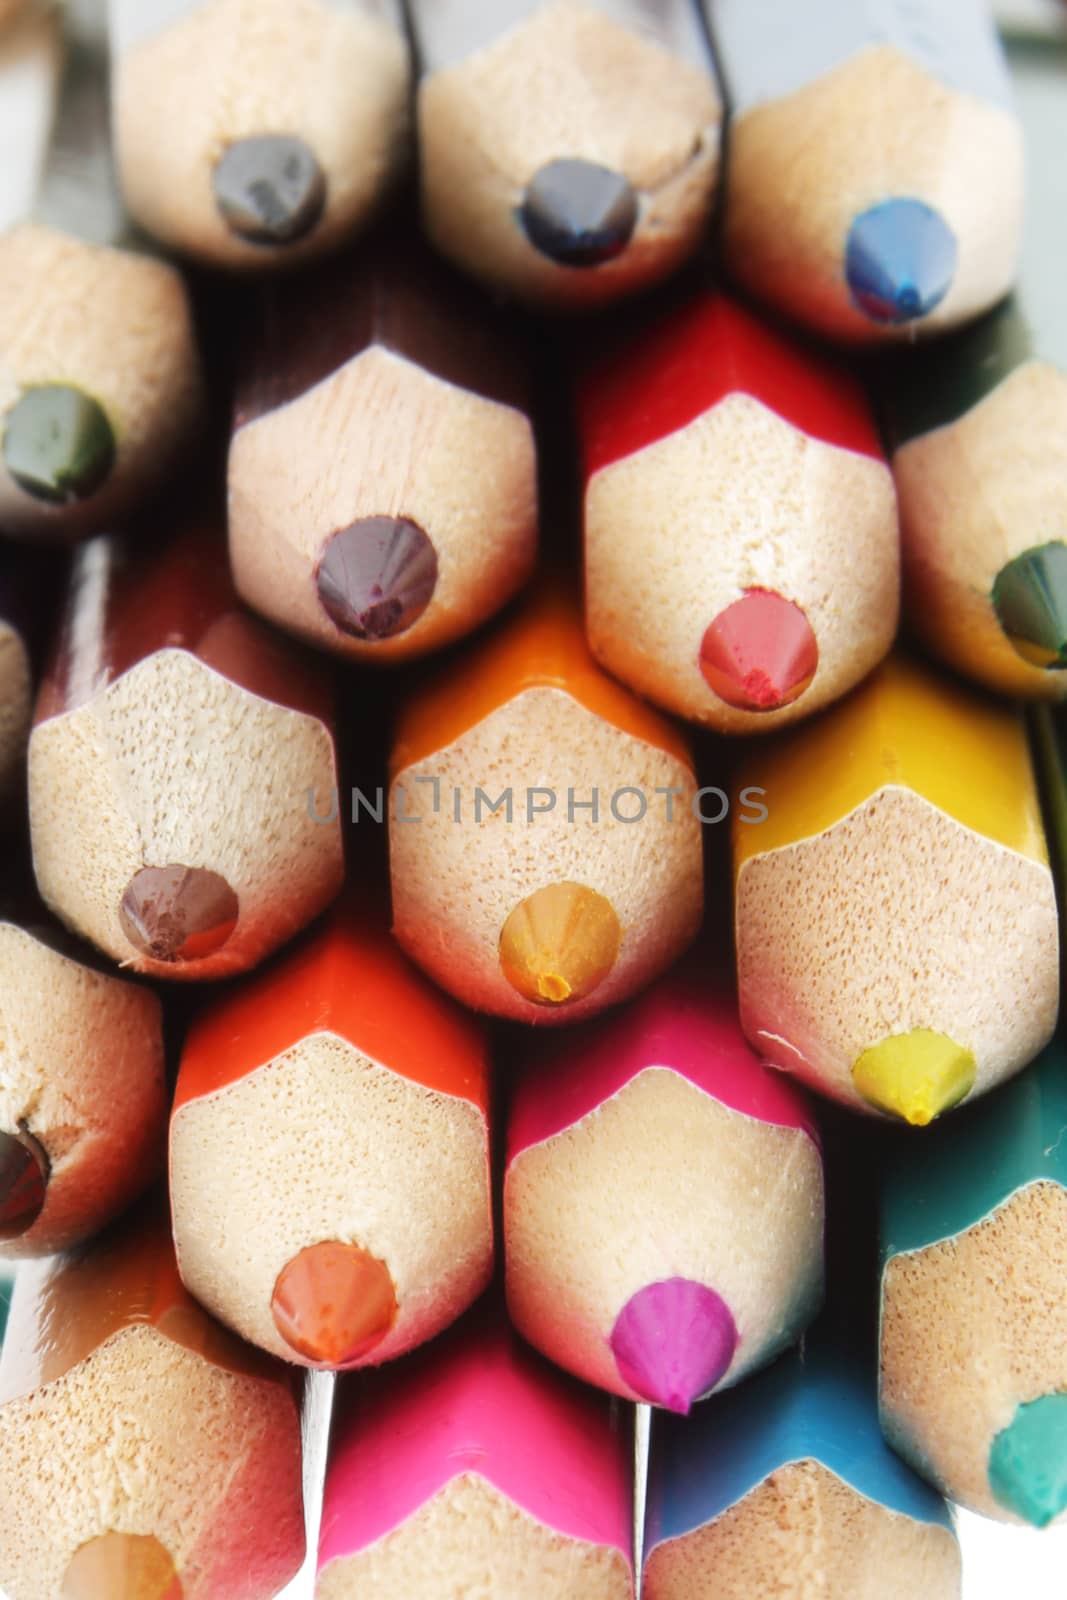 A collection of multi colored pencils close up with differential focus